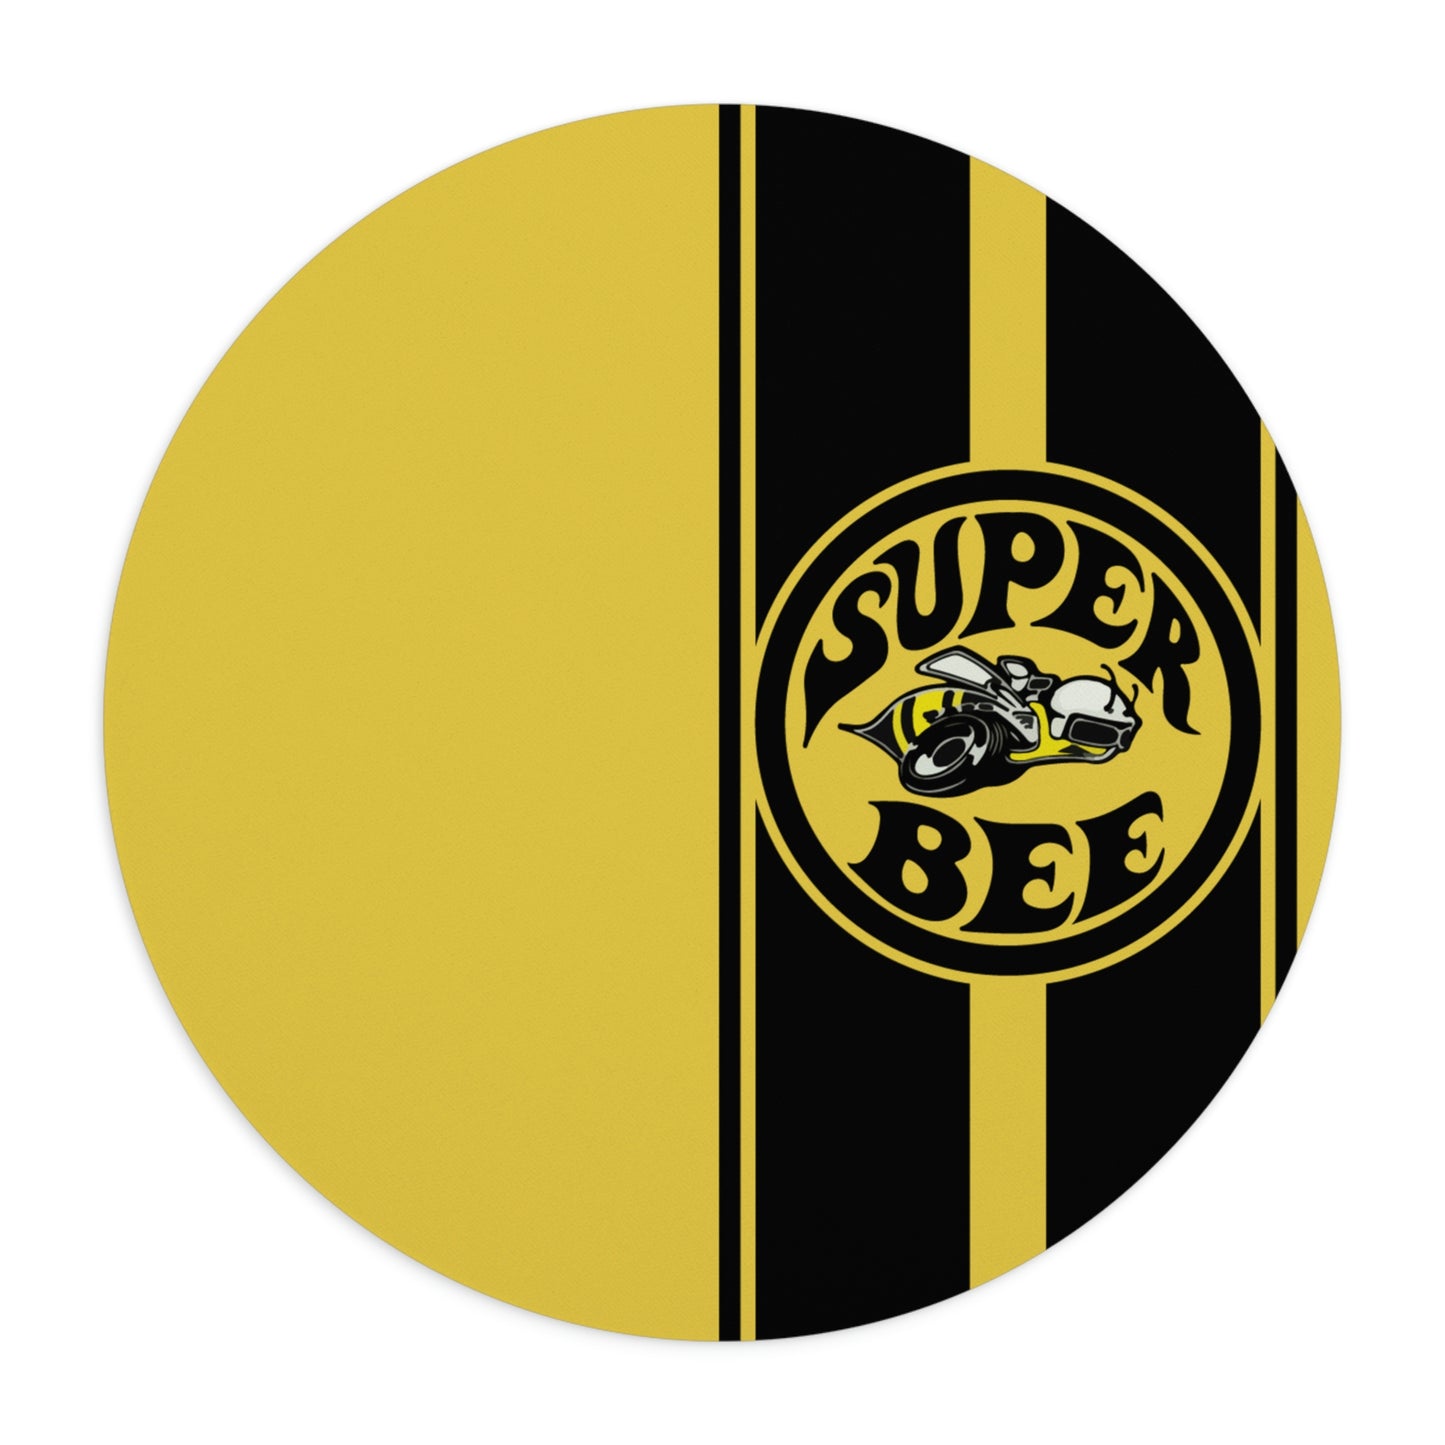 Super Bee Mouse Pad